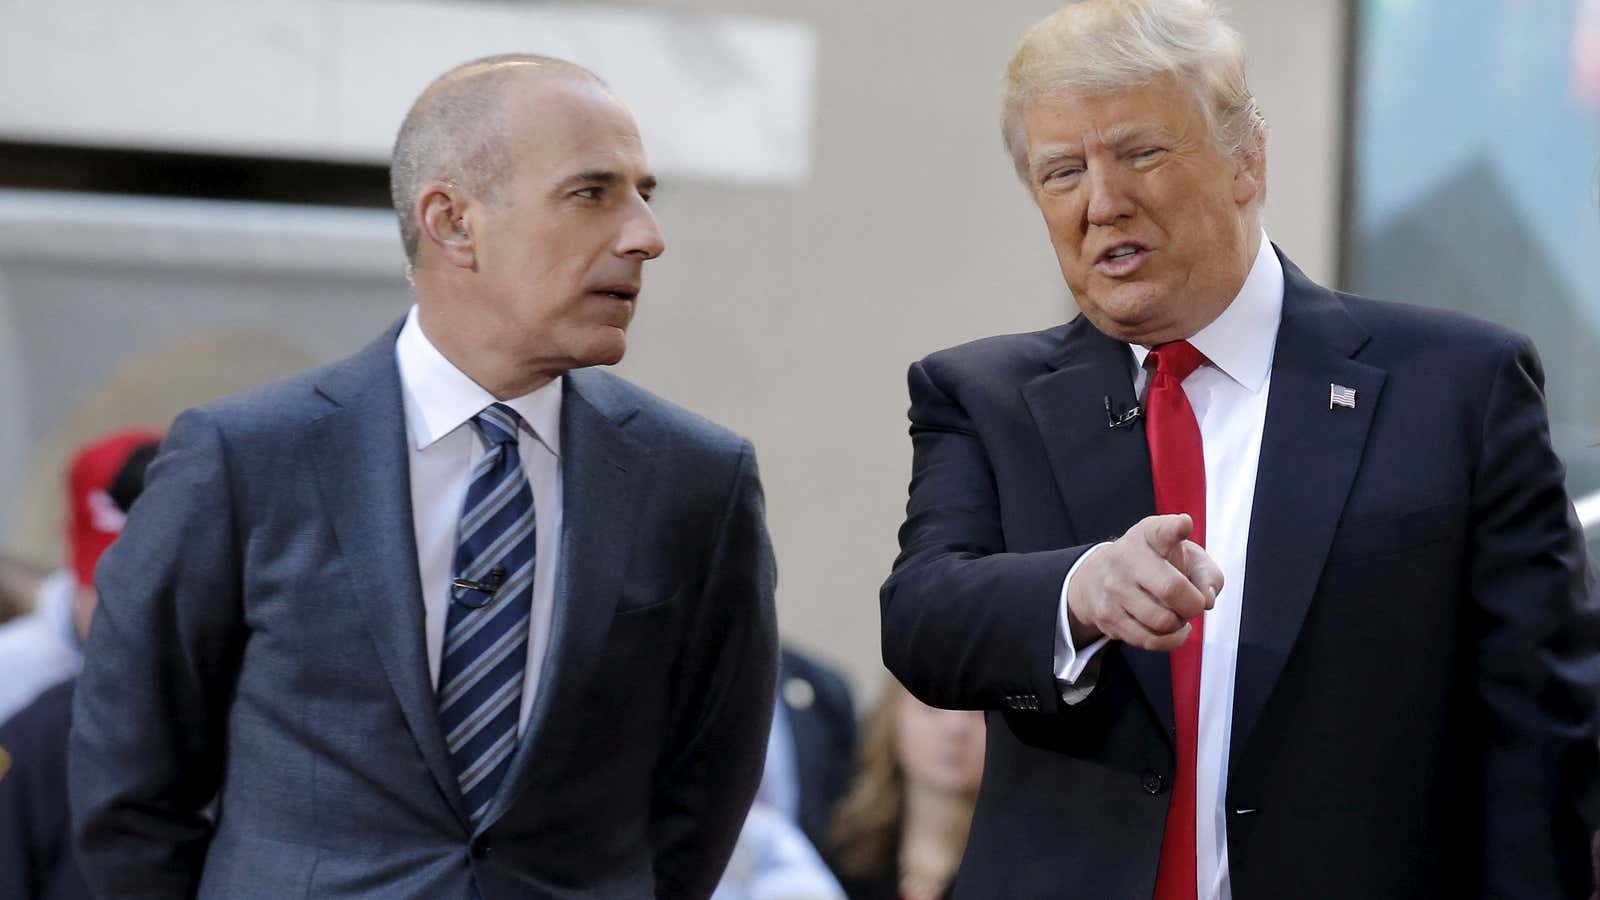 FILE PHOTO: U.S. Republican presidential candidate Donald Trump speaks with host Matt Lauer before a town hall interview on NBC’s “Today” show in New York,…